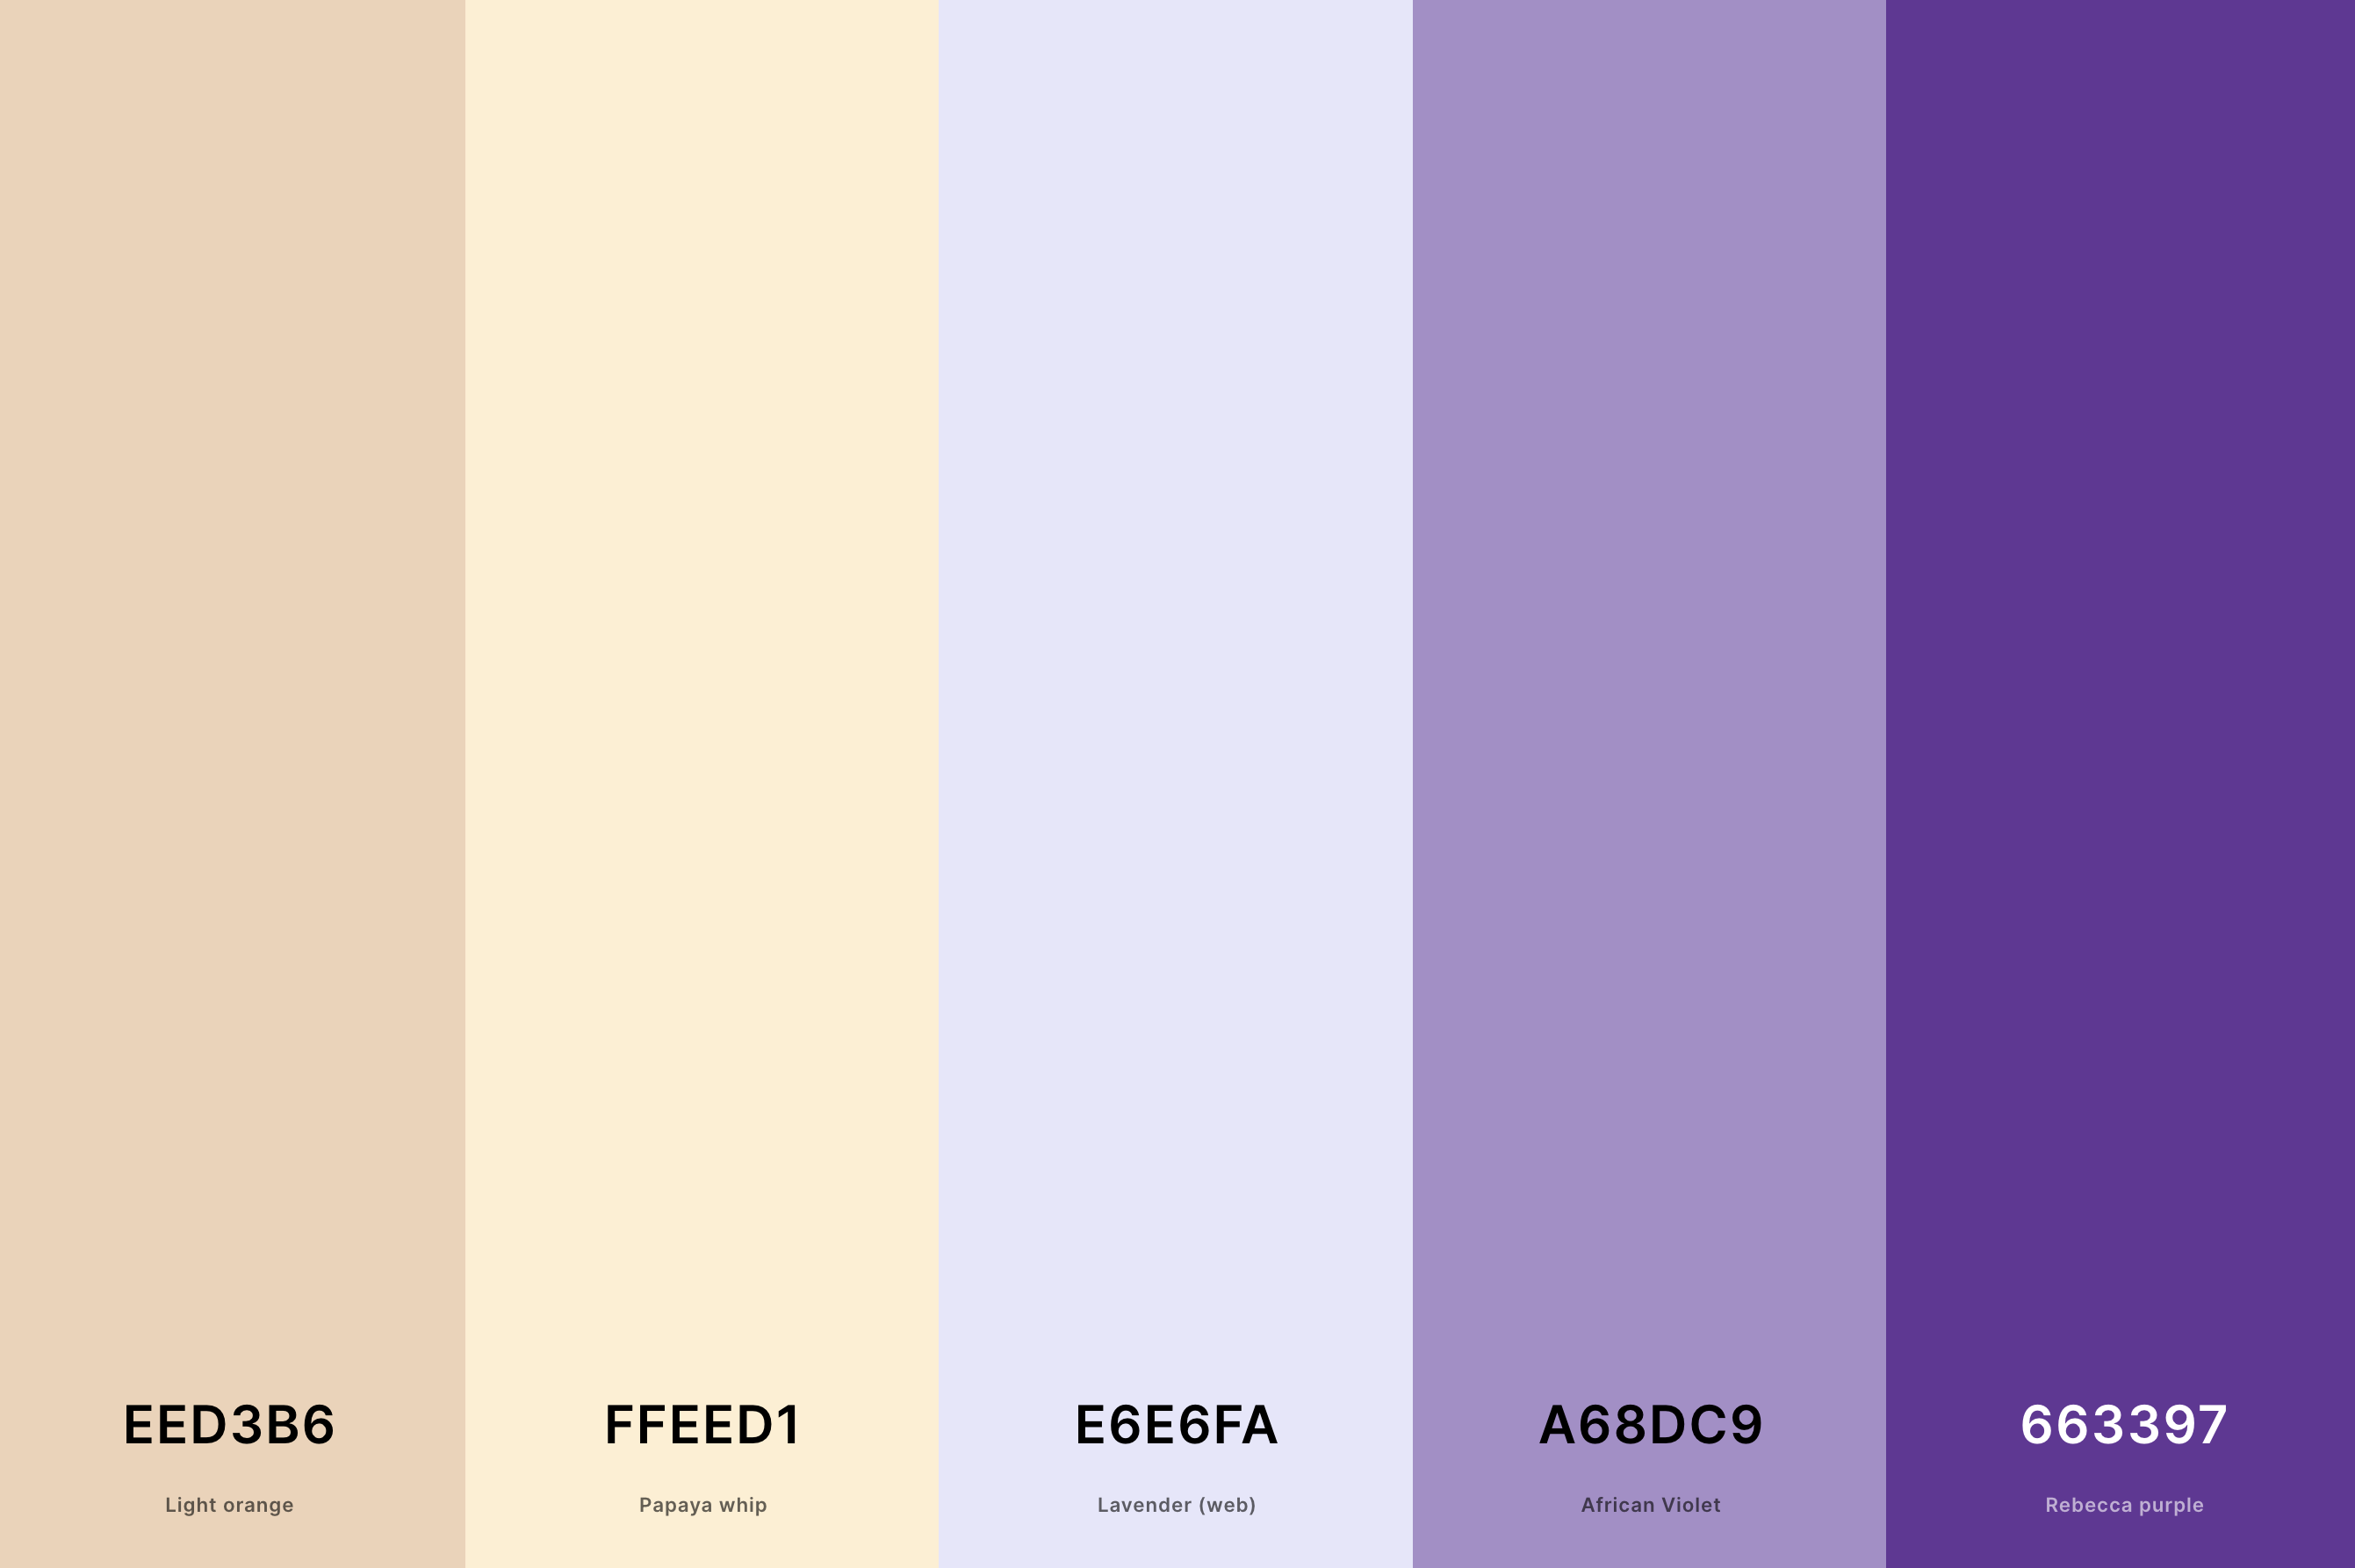 7. Lavender And Cream Color Palette Color Palette with Light Orange (Hex #EED3B6) + Papaya Whip (Hex #FFEED1) + Lavender (Web) (Hex #E6E6FA) + African Violet (Hex #A68DC9) + Rebecca Purple (Hex #663397) Color Palette with Hex Codes